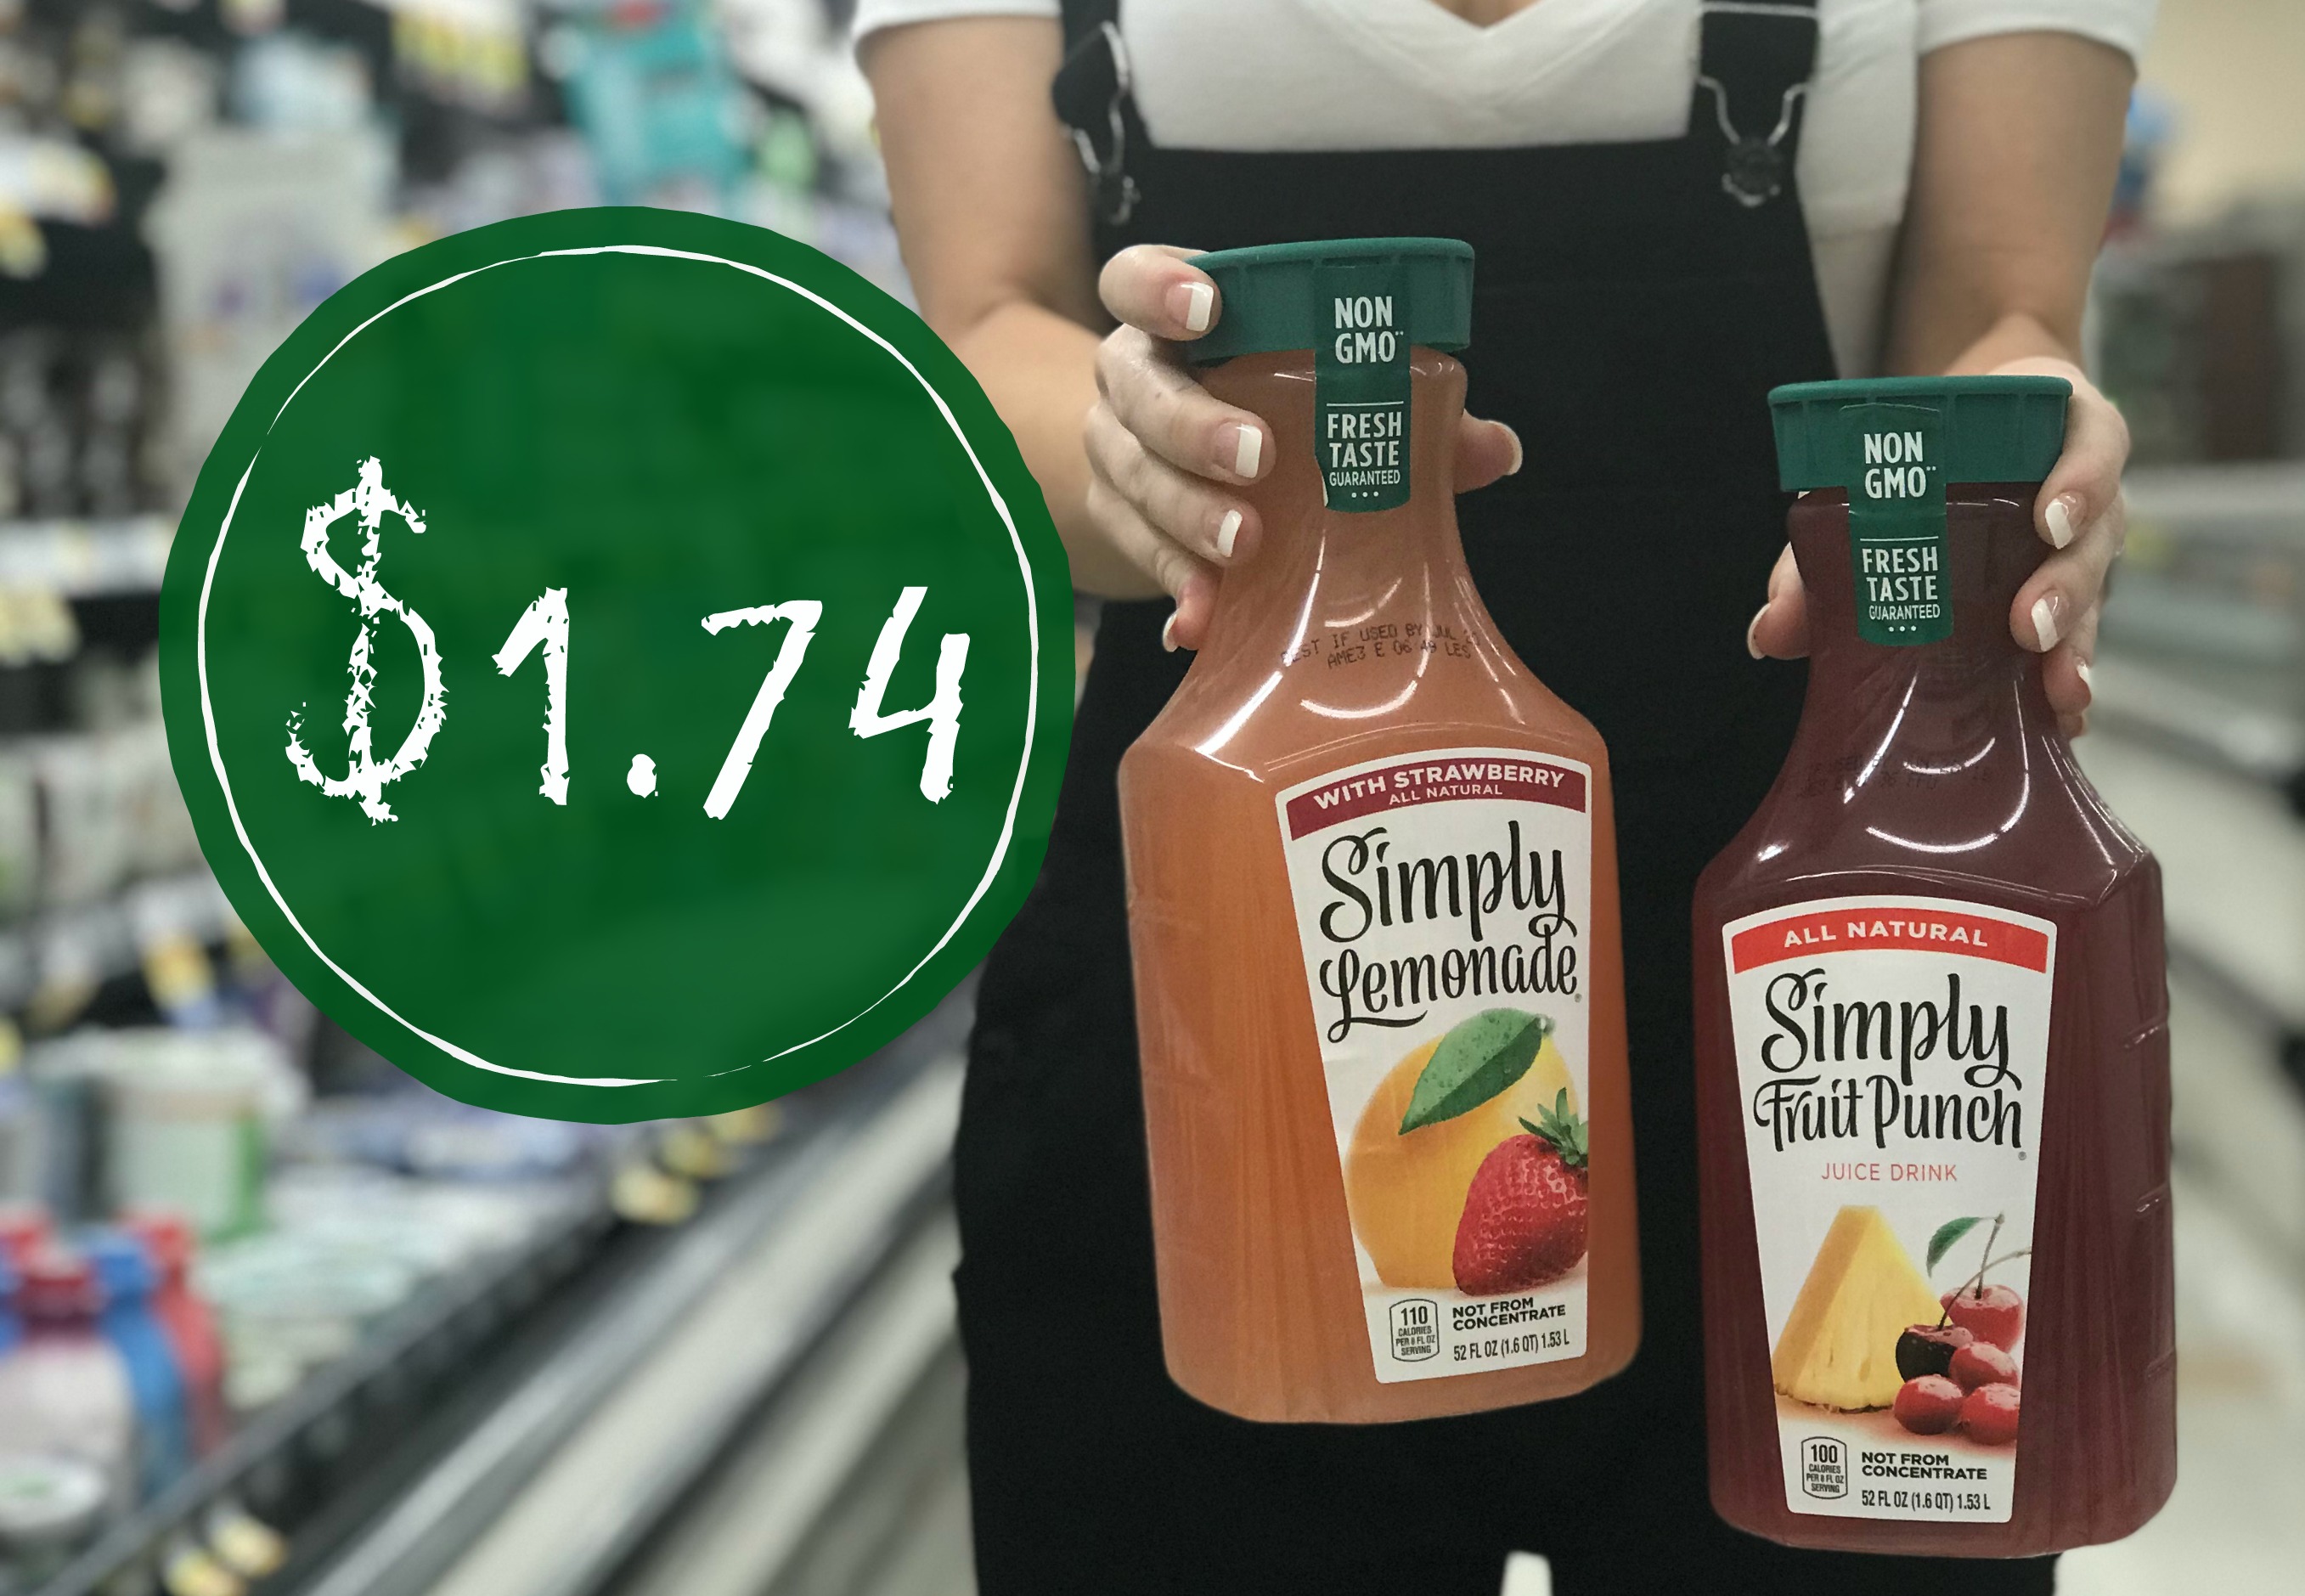 Print Save Simply Beverages Coupon For Kroger Sale Use Now And Pay Just 1 74 Kroger Krazy